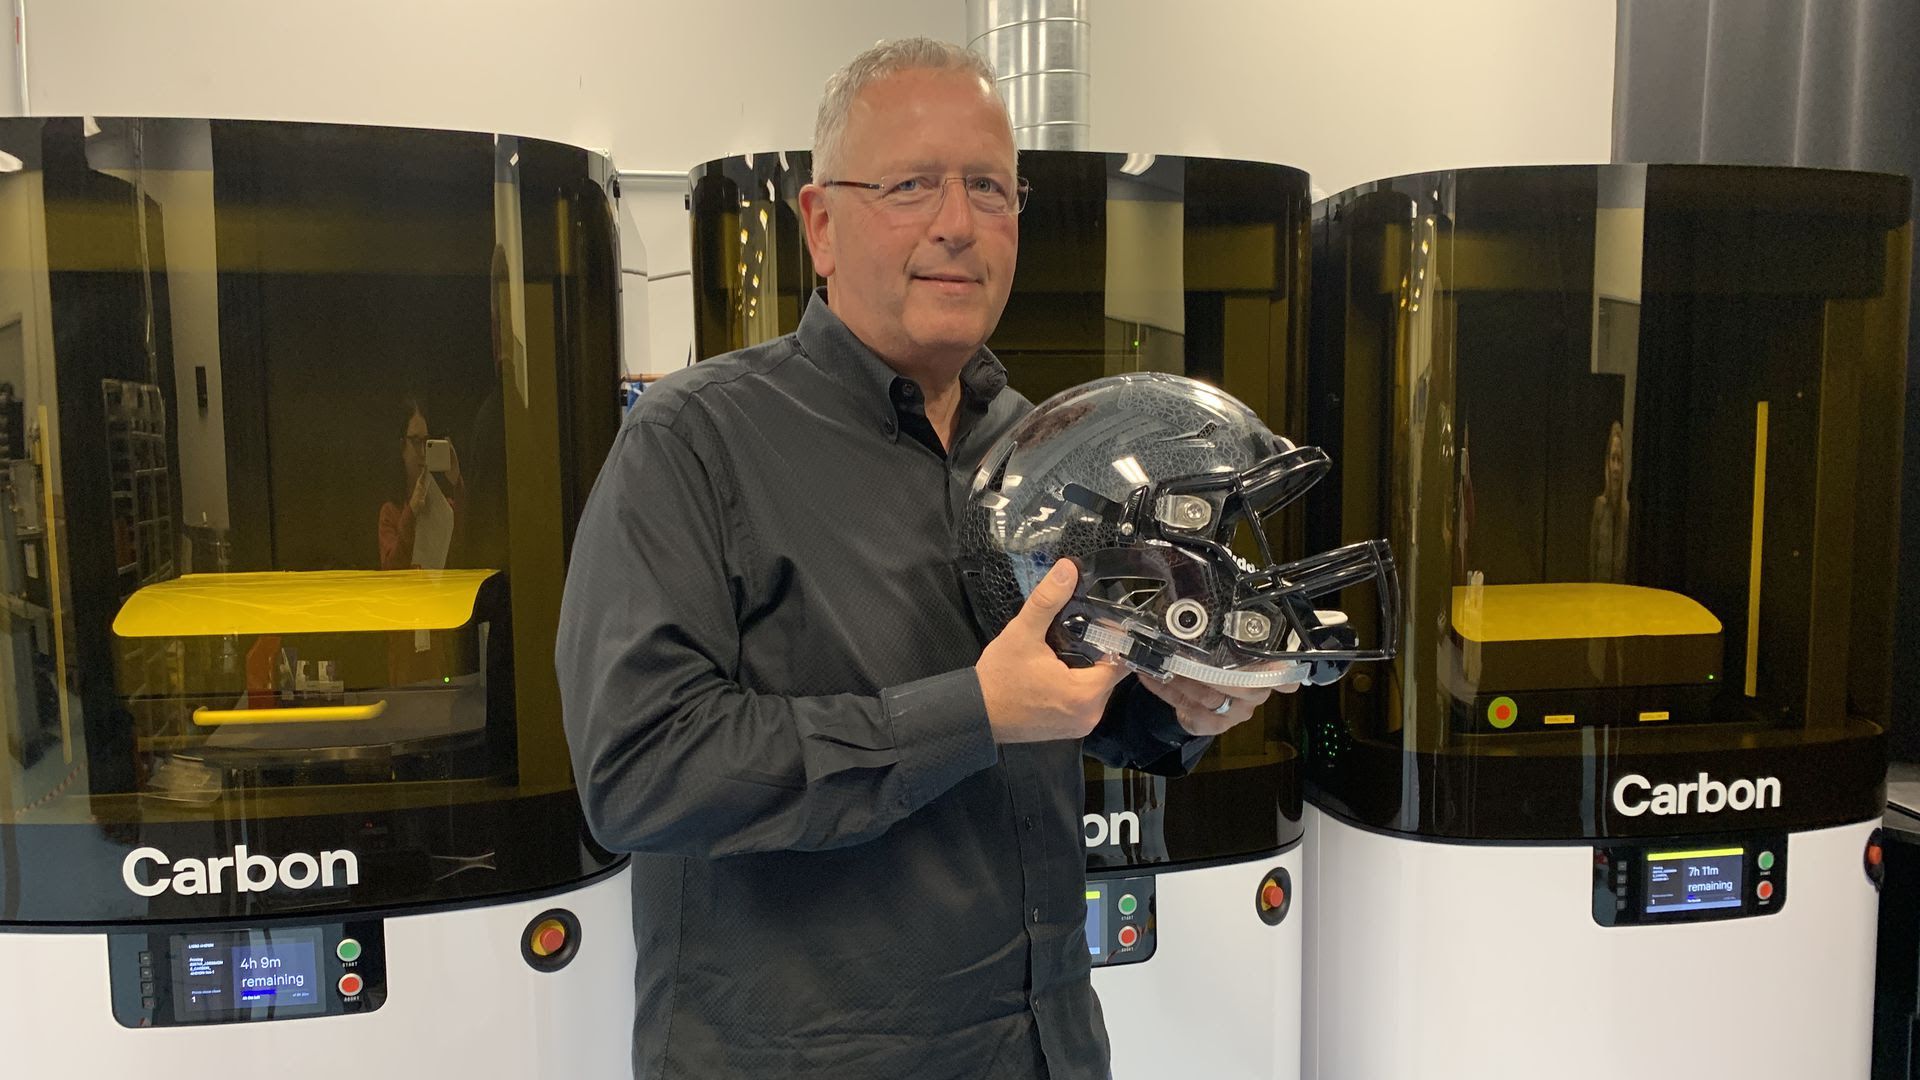 Carbon CEO Joe DeSimone holding a football helmet with 3D printed inserts using the new L1 printer.